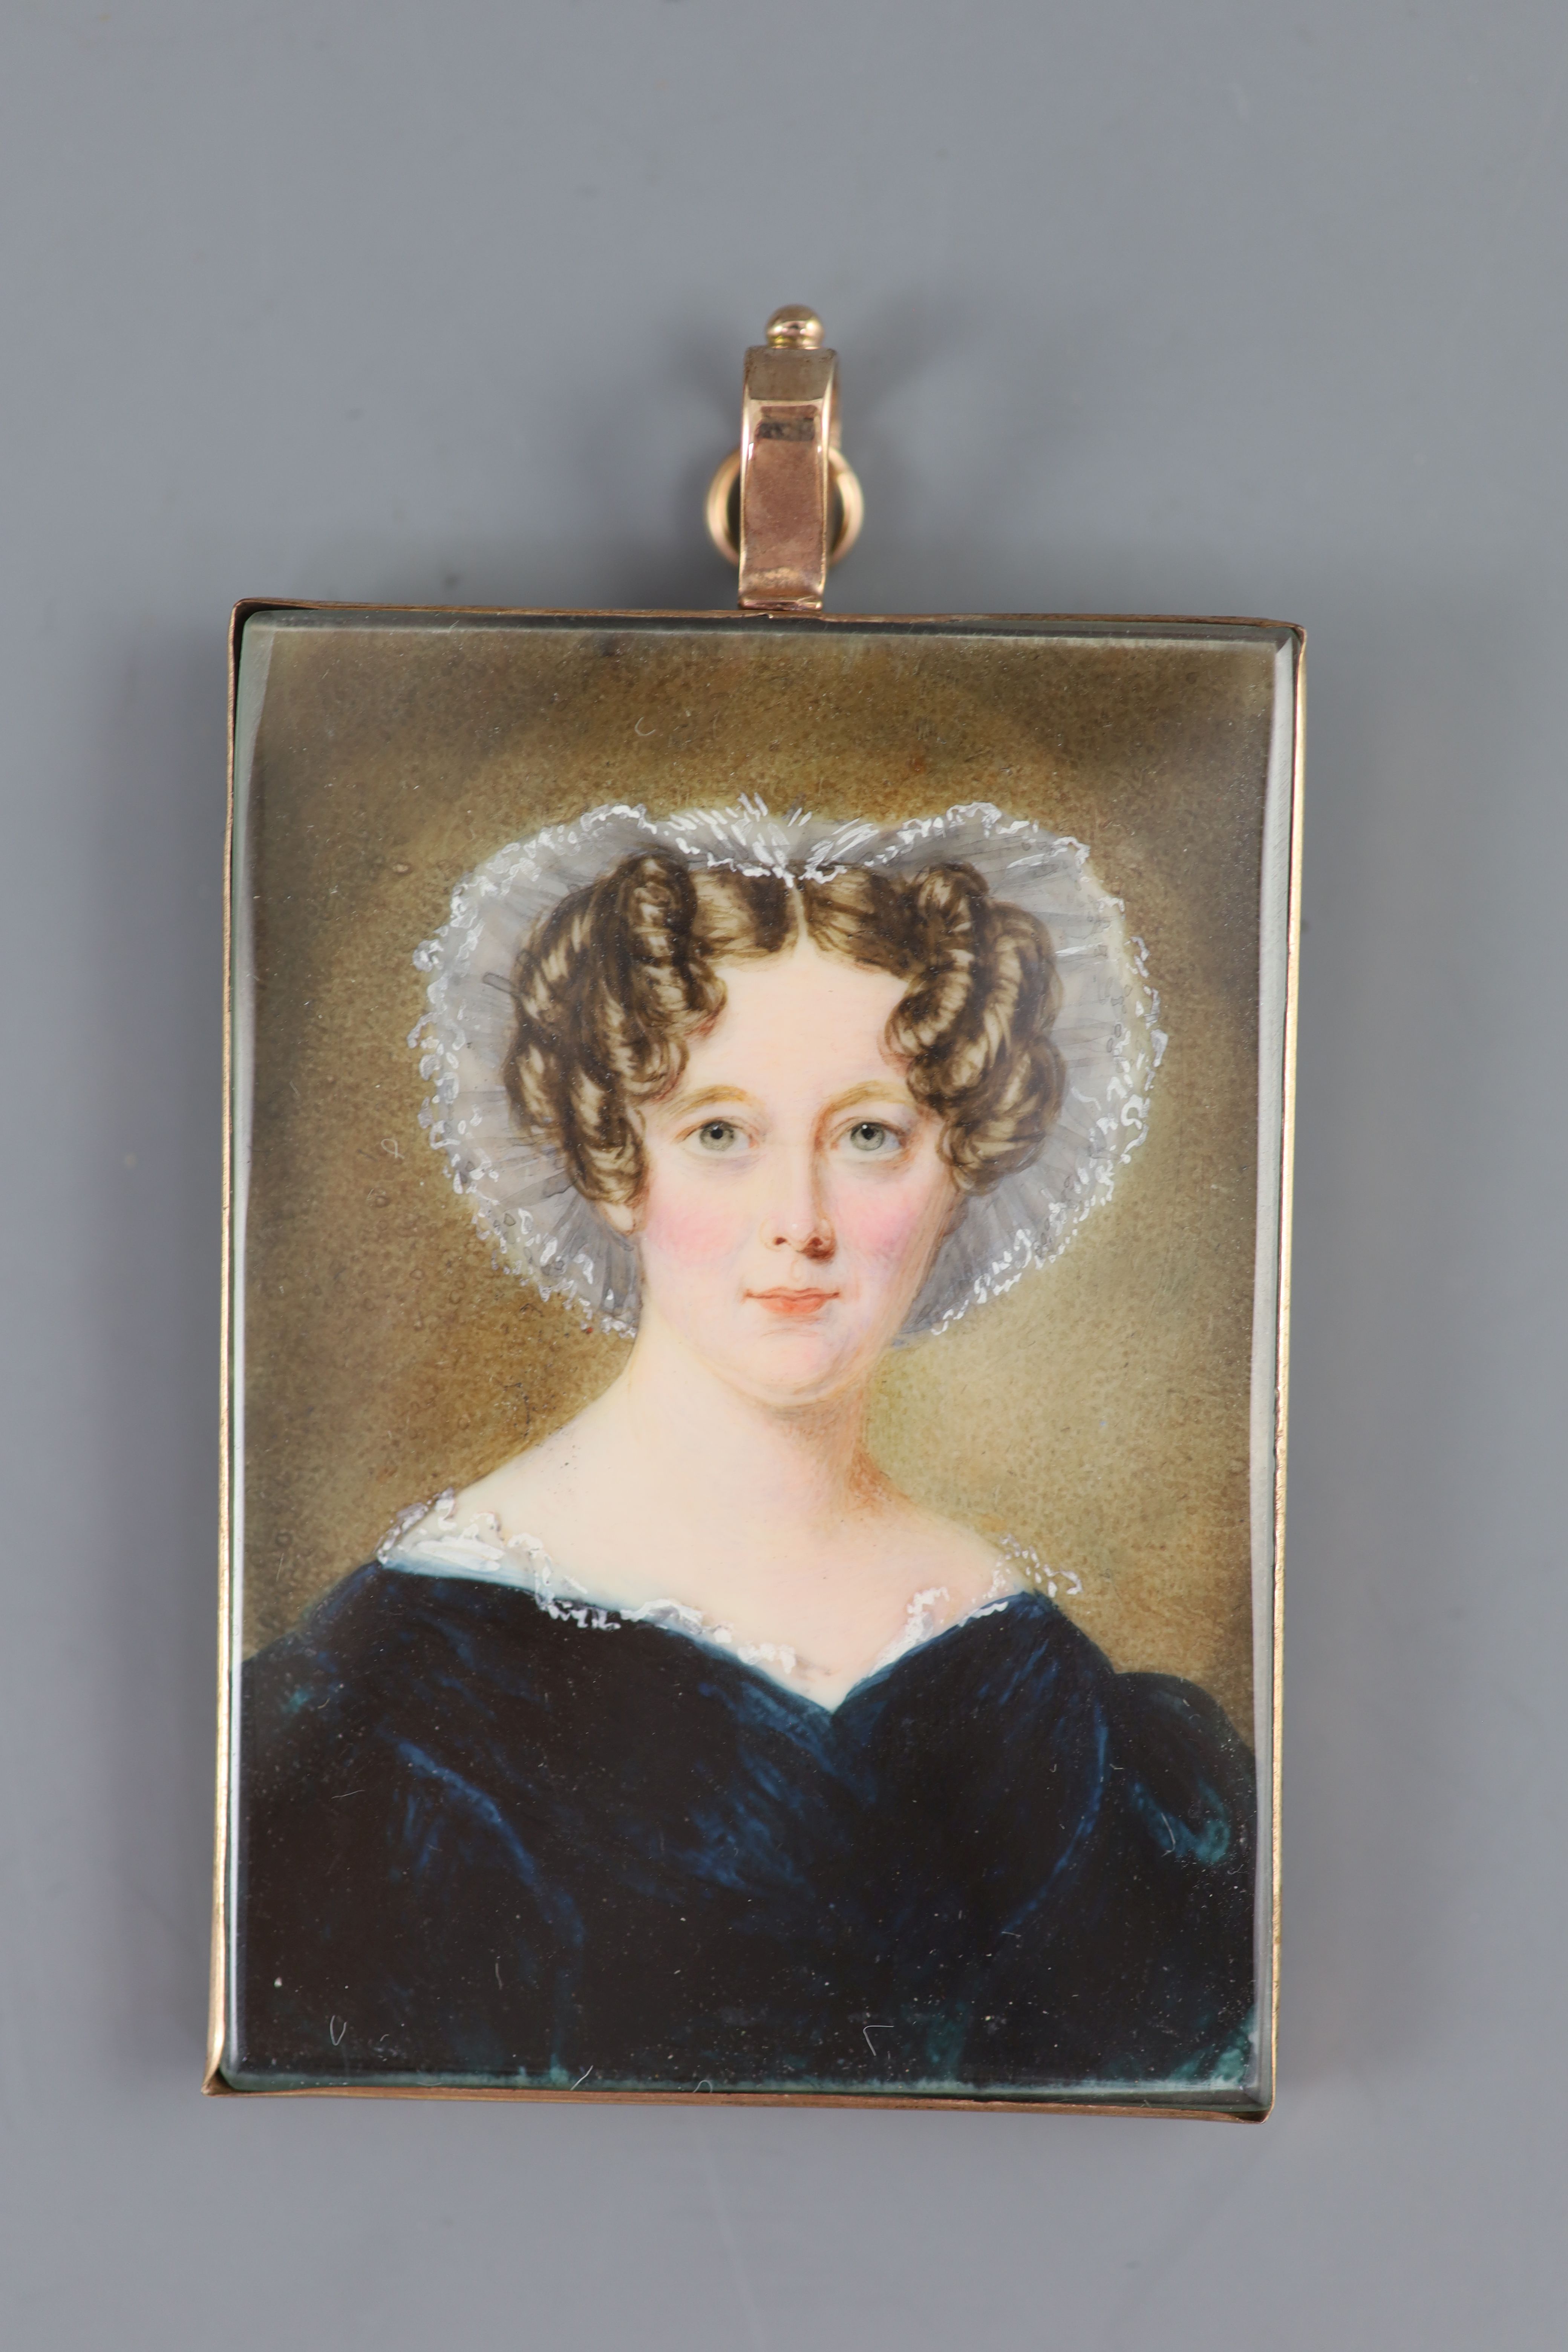 William Egley (1798-1870) Portrait miniature of a lady wearing a lace bonnet and green dress 2.5 x 1.75in., gold framed